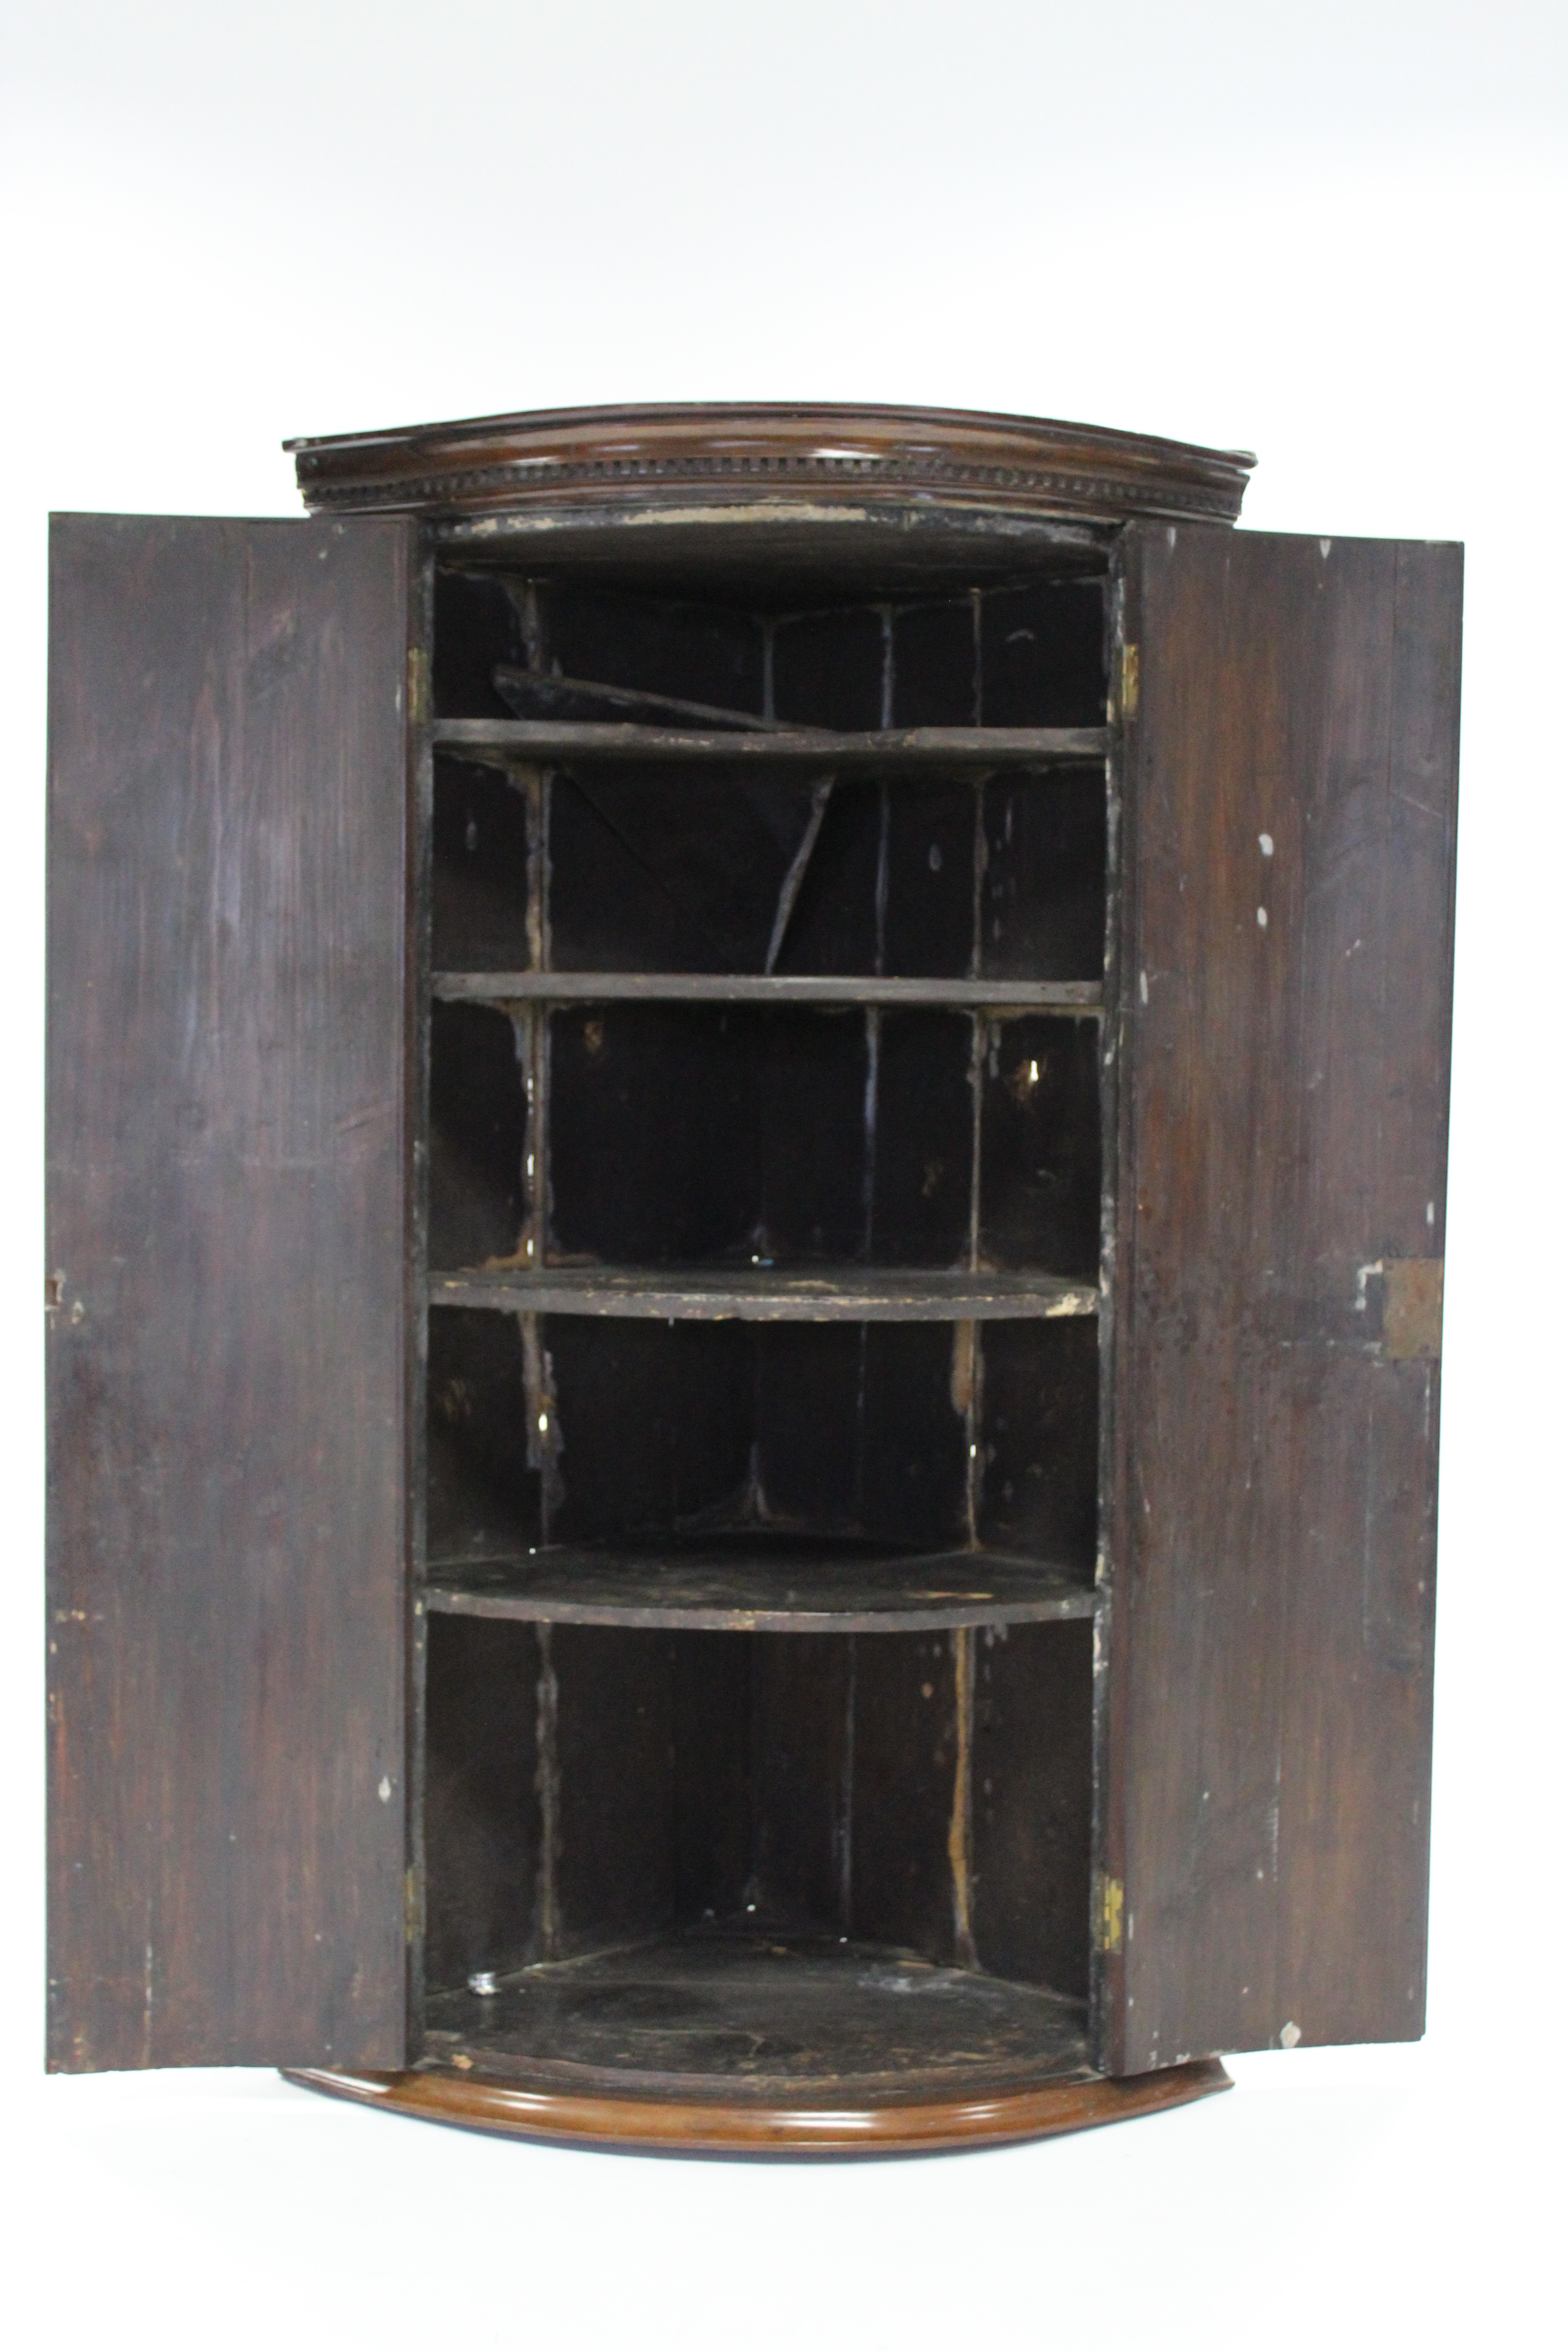 An early 19th century inlaid-mahogany bow-front corner cupboard, with dentil cornice above a pair of - Image 2 of 2